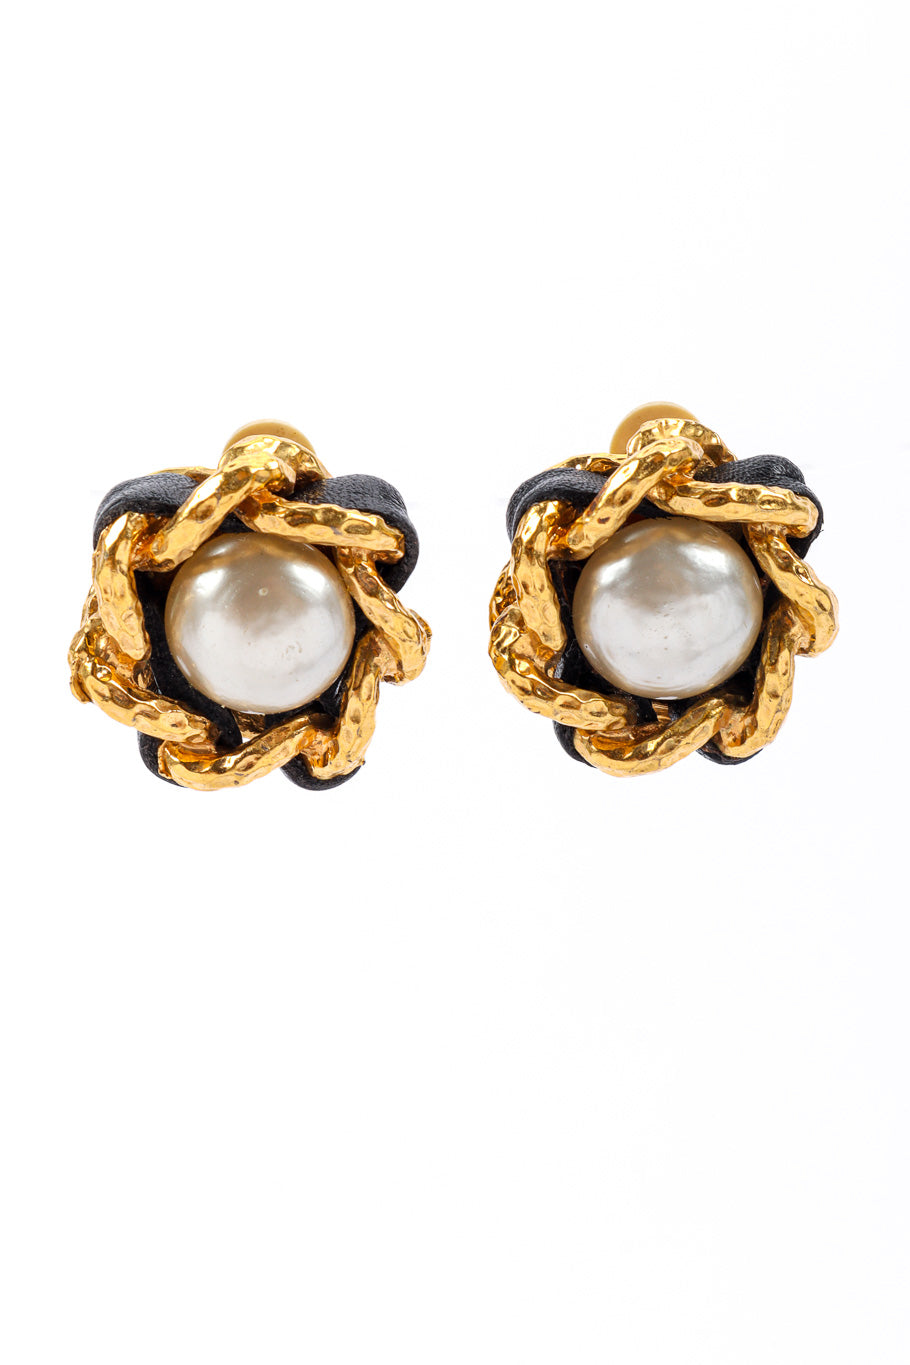 Chanel Vintage 1993 Large Pearl Gold Statement Clip On Earrings